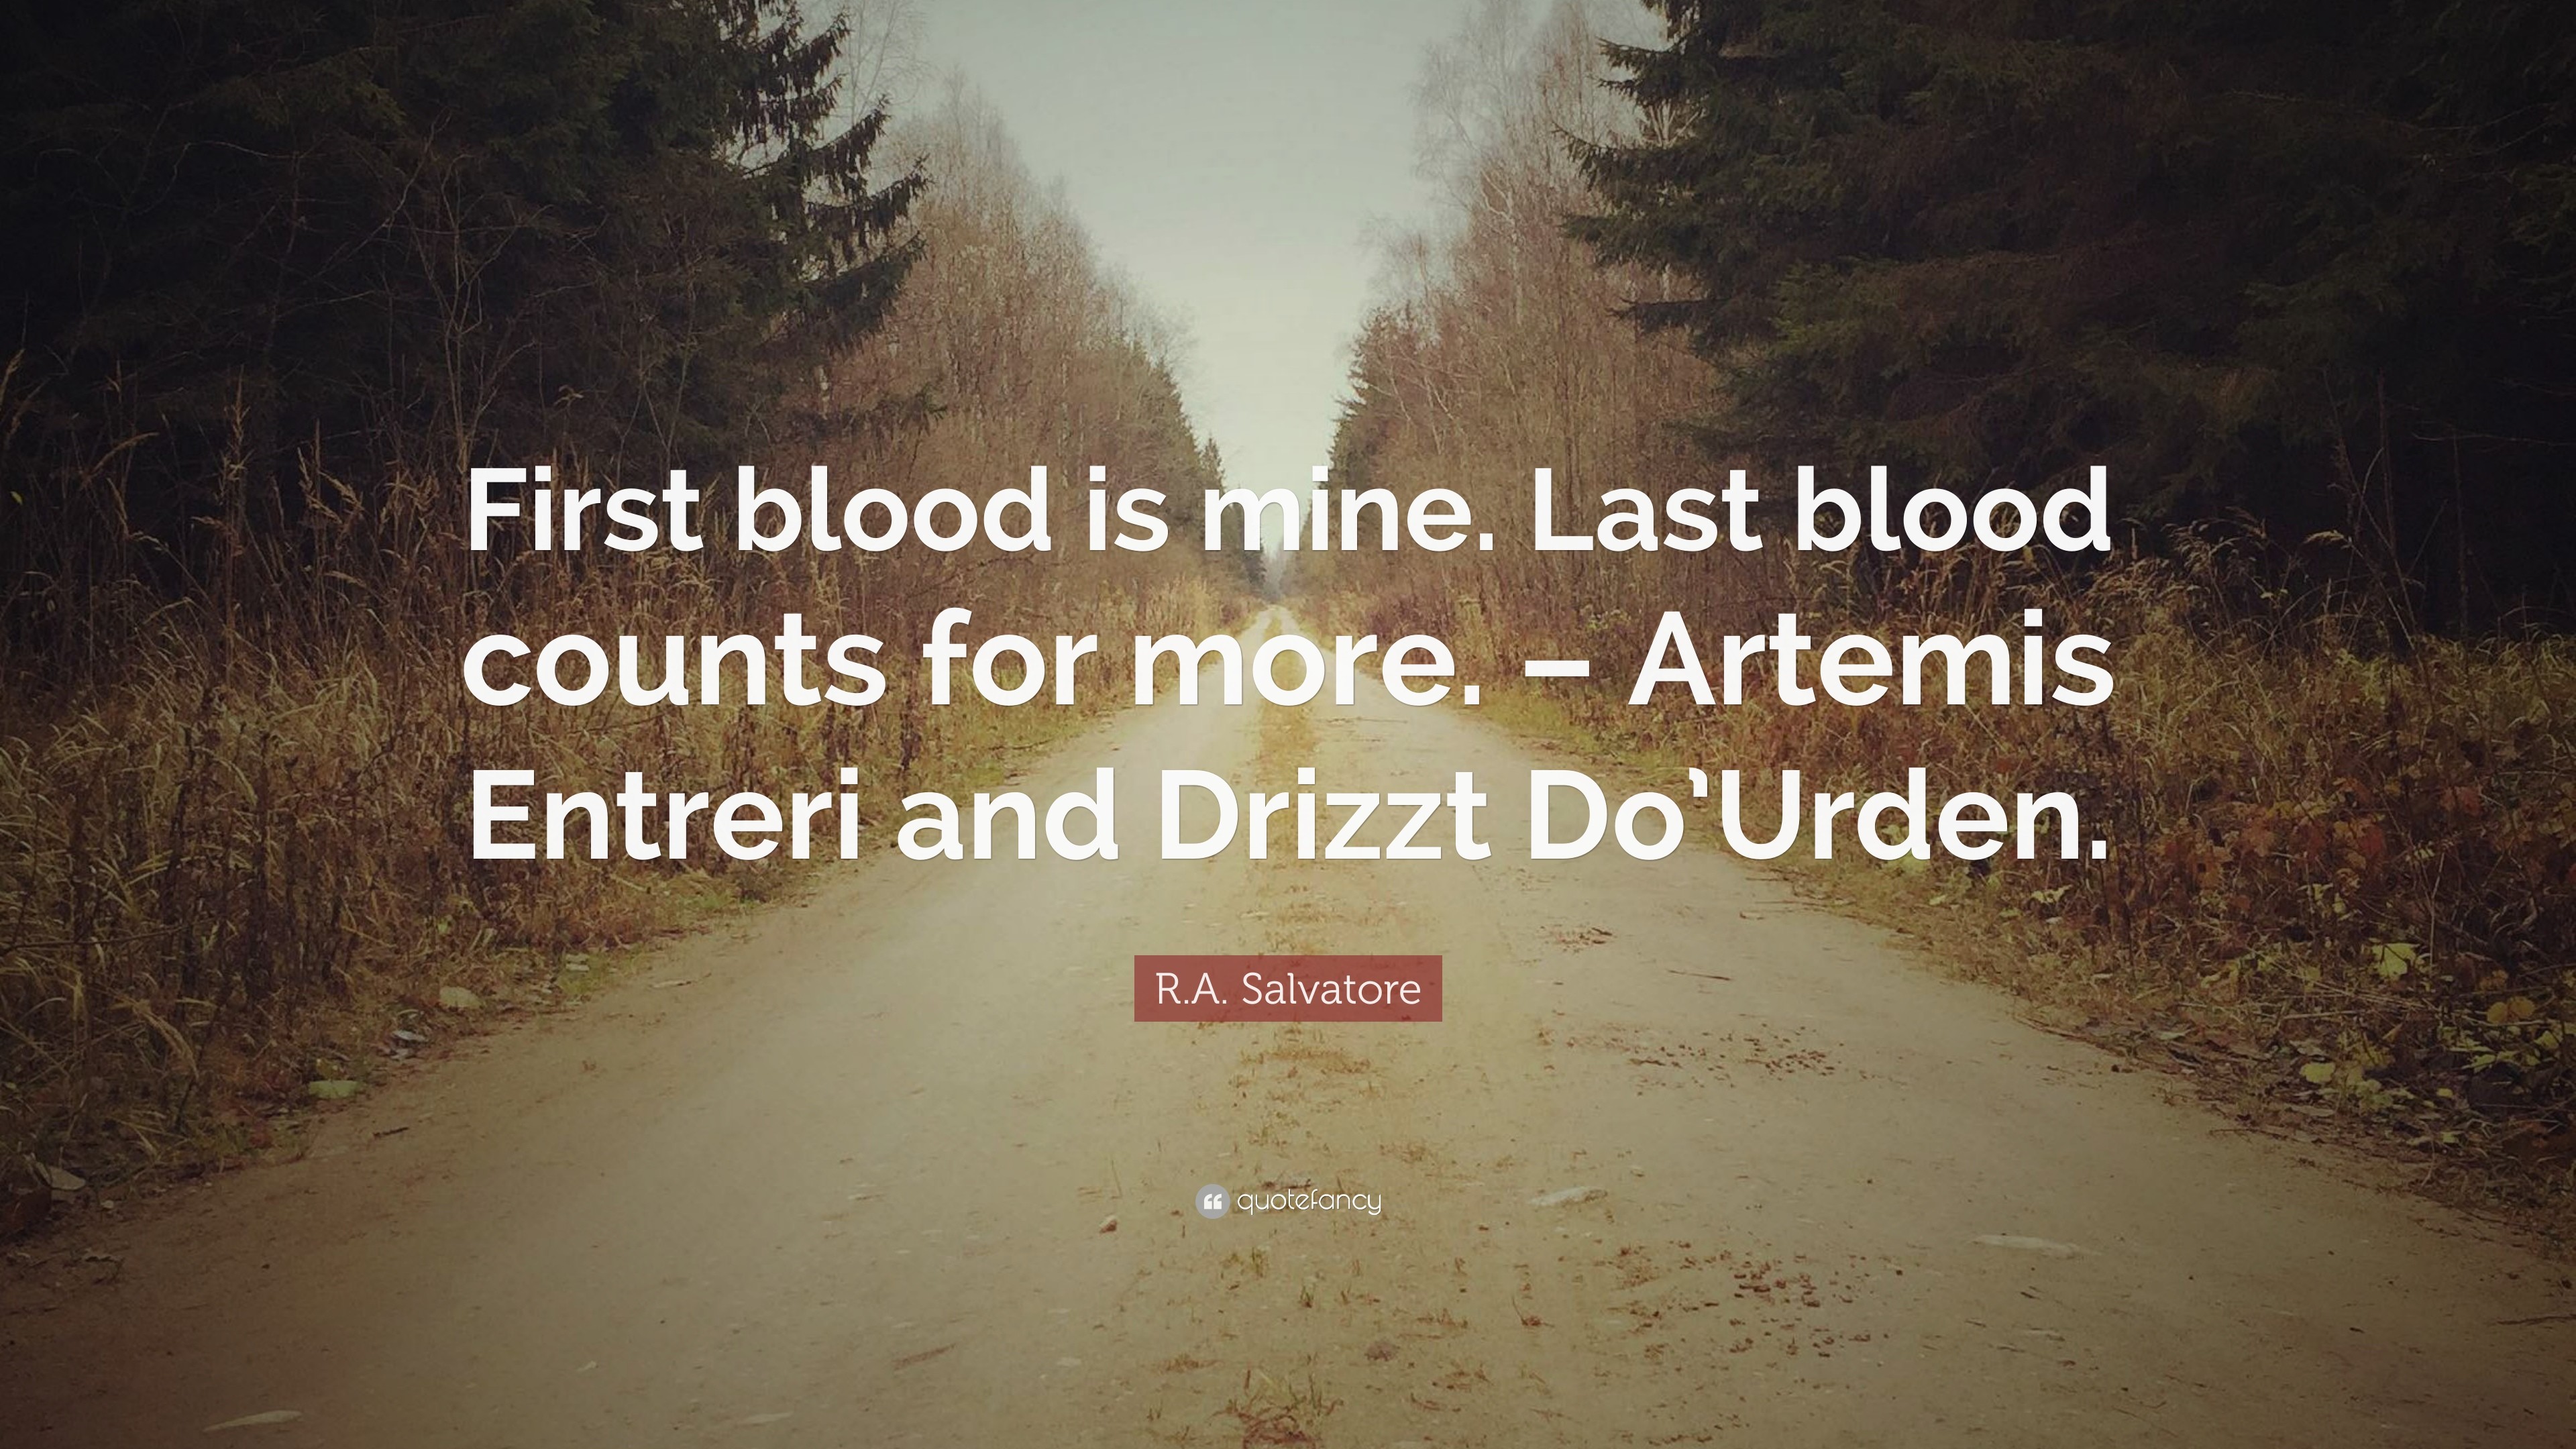 3840x2160 R.A. Salvatore Quote: “First blood is mine. Last blood counts for more.